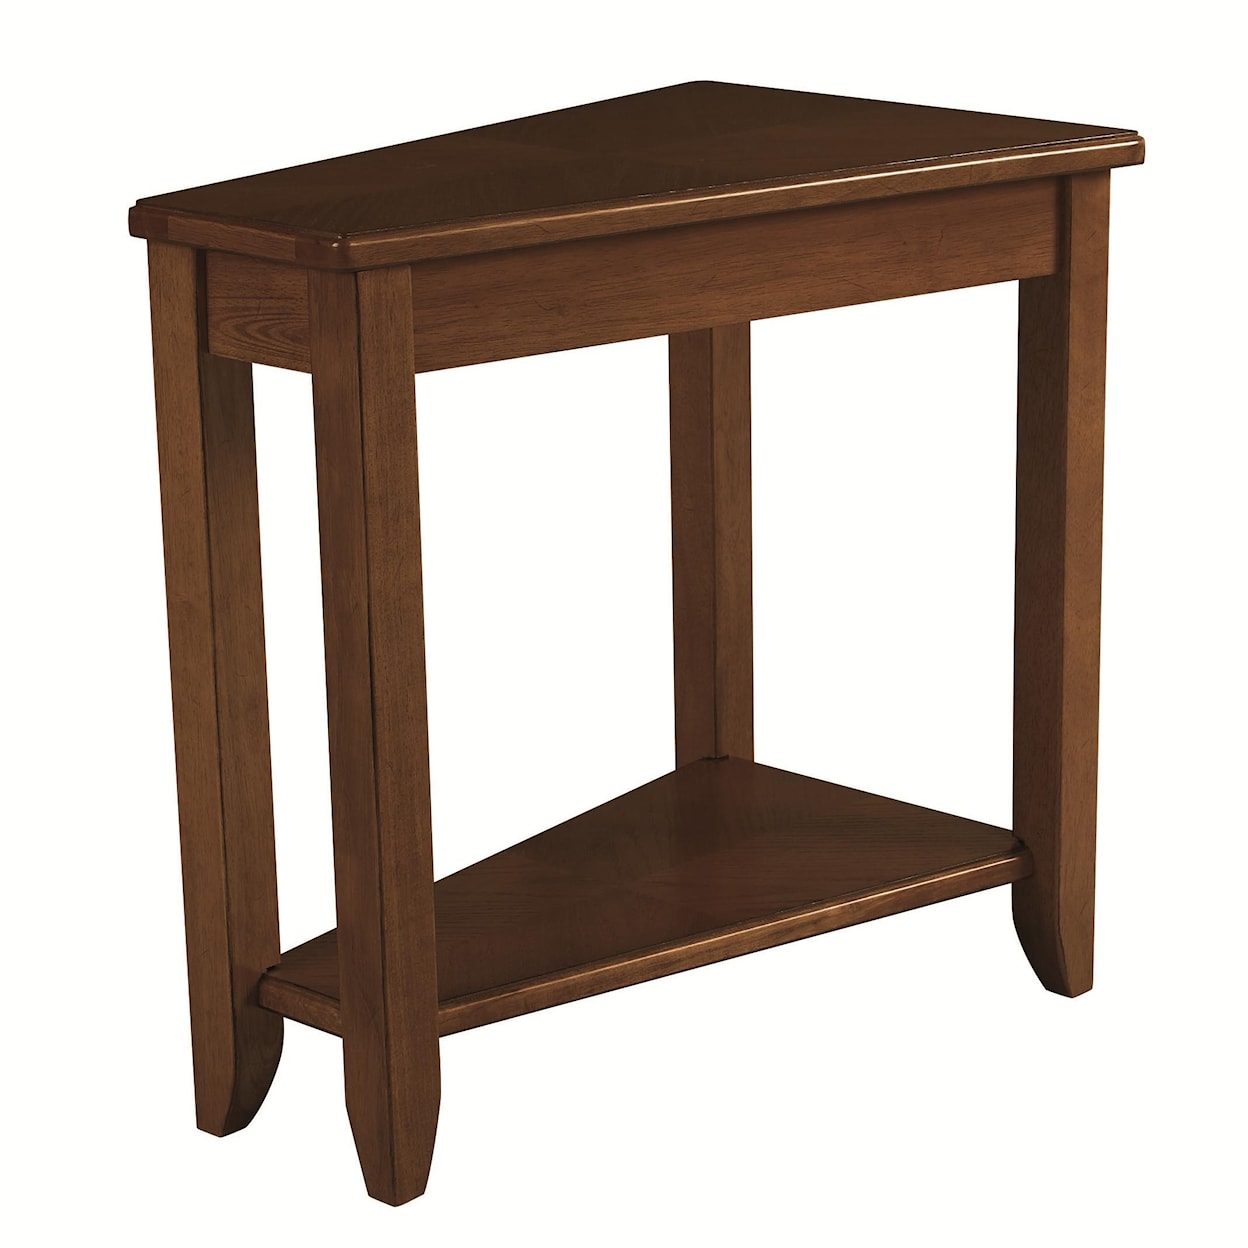 Hammary Chairsides Oak Chairside Table